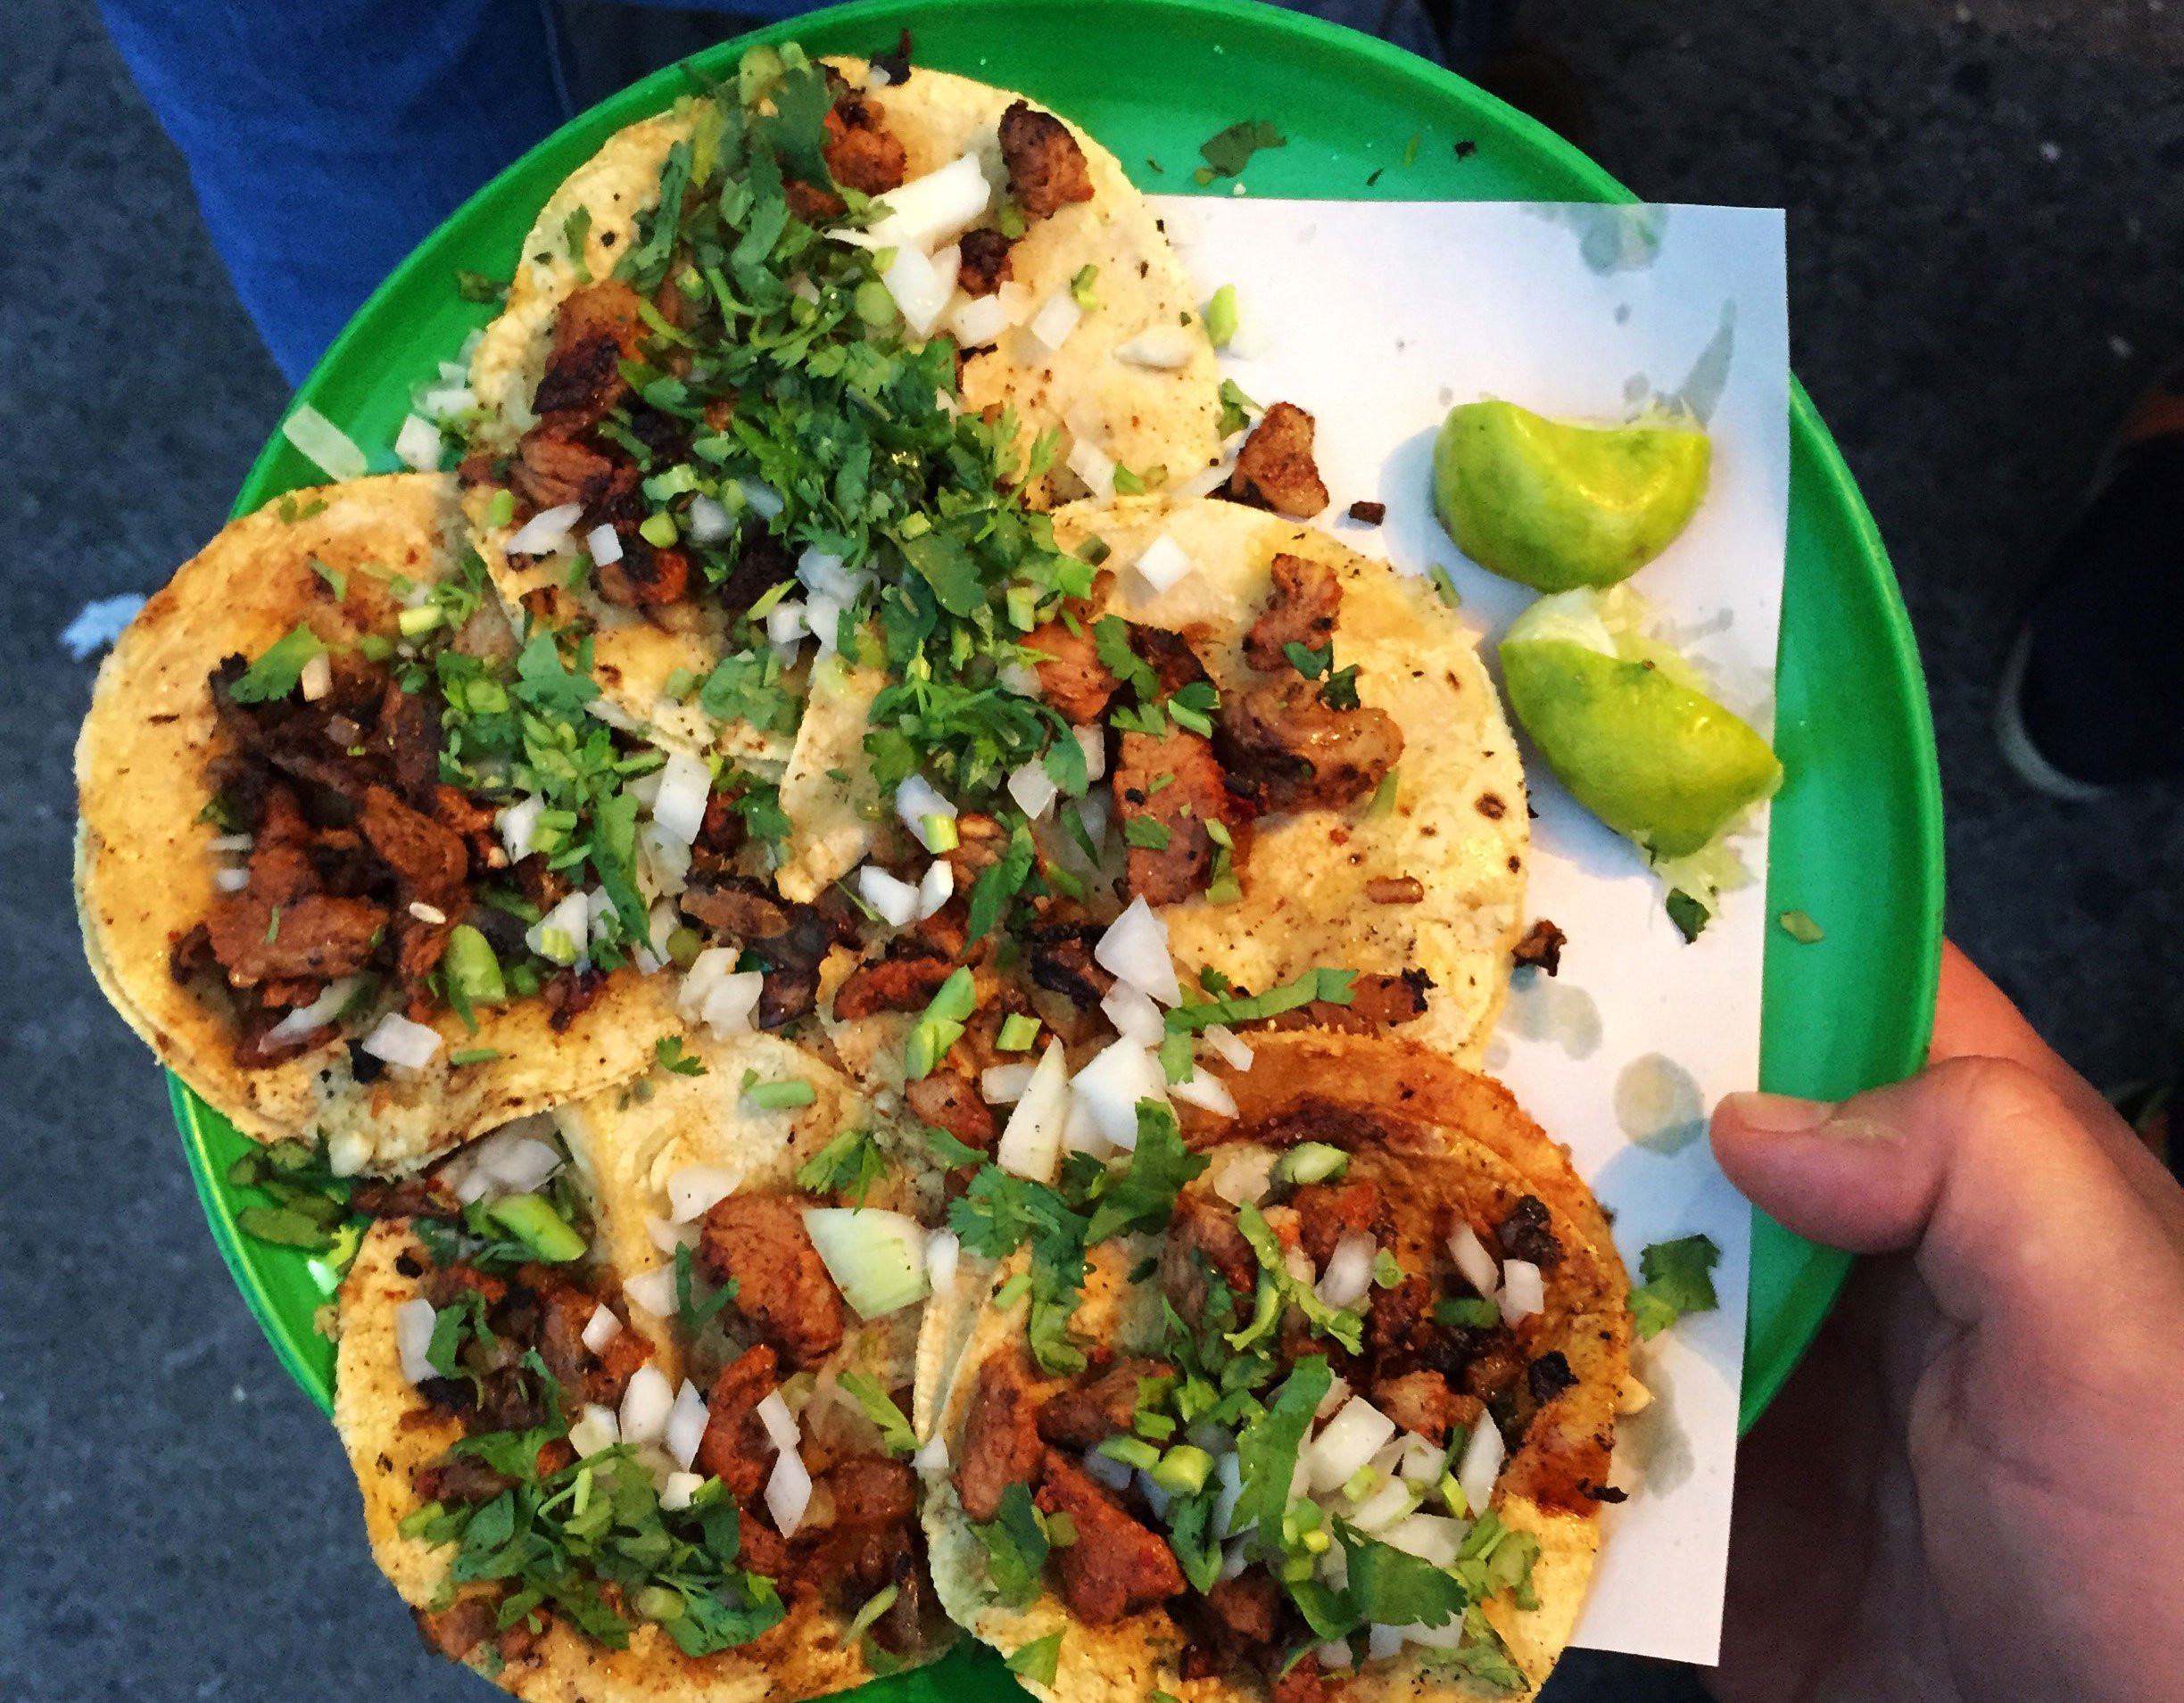 Pictures Of Mexican Tacos
 The venerable taco is mon to all regions and a great